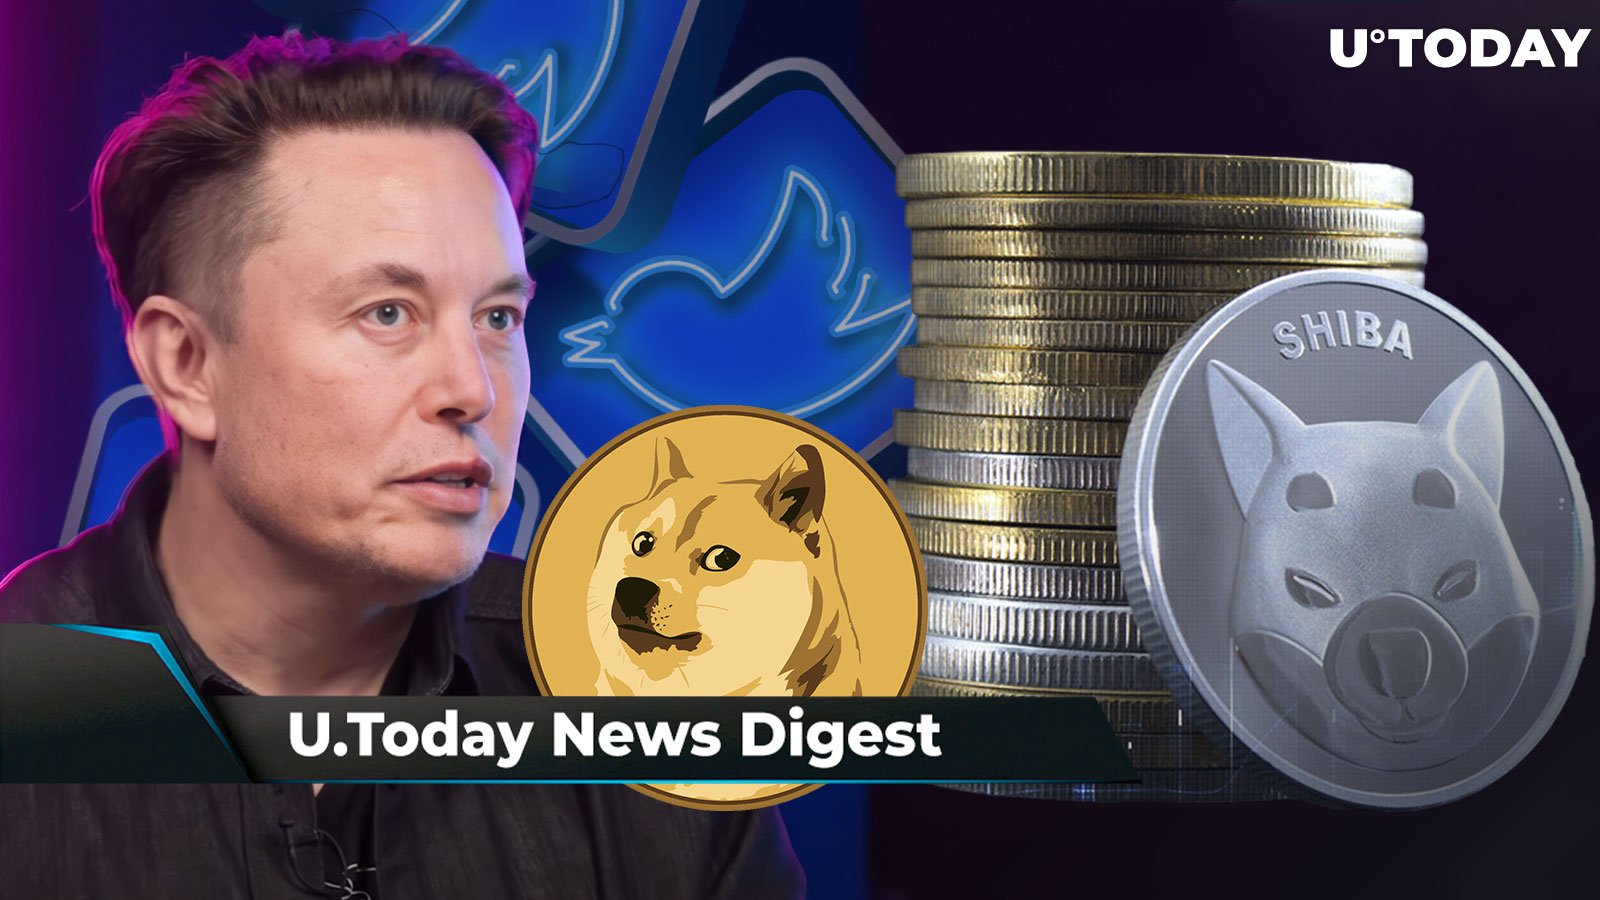 SHIB Trifecta Accepted via Prepaid Visa Cards, Michael Burry Shocks Community with One-Word Tweet, Elon Musk’s Twitter 'Slaps' DOGE Army: Crypto News Digest by U.Today